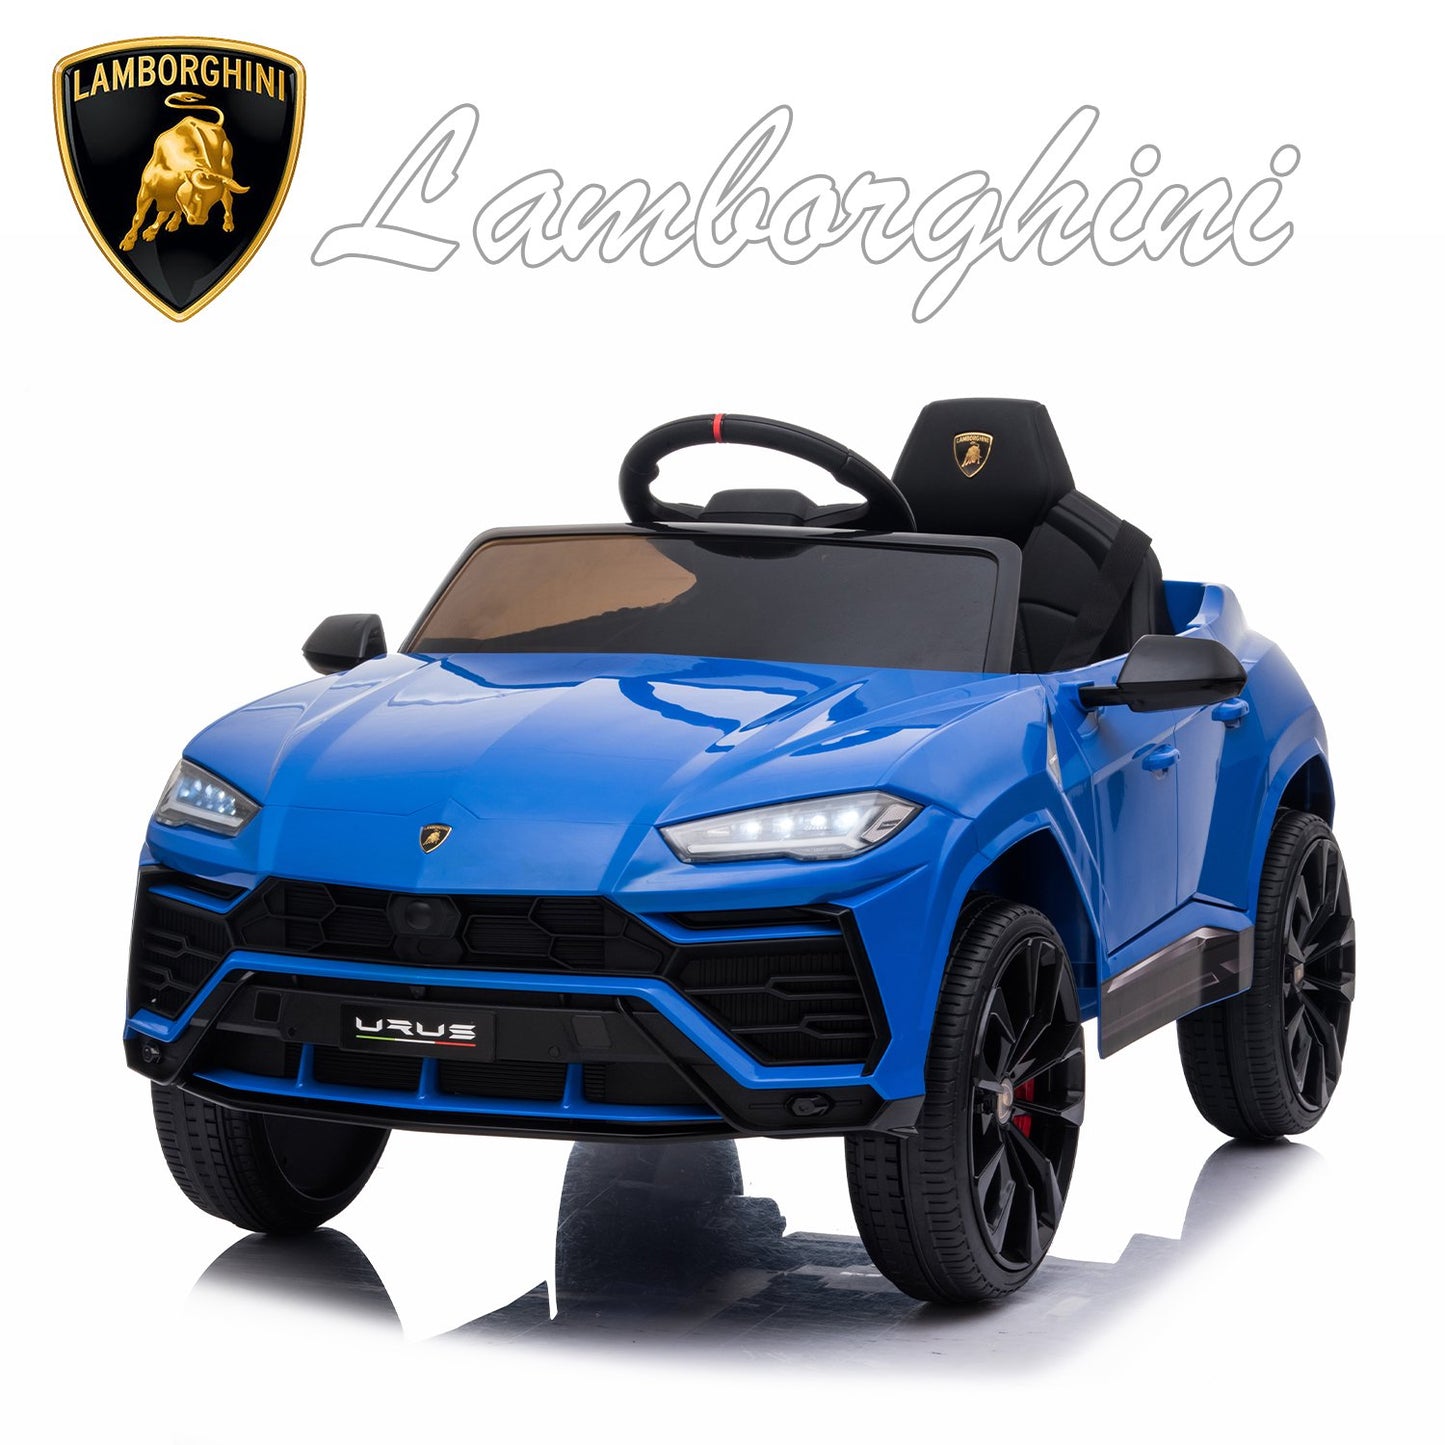 Blue Licensed Lamborghini 12 V Powered Ride on Cars with Remote Control, 3 Speeds, LED Lights, MP3 Player, Horn, Kids Electric Vehicles Ride on Toy for Boys Girls